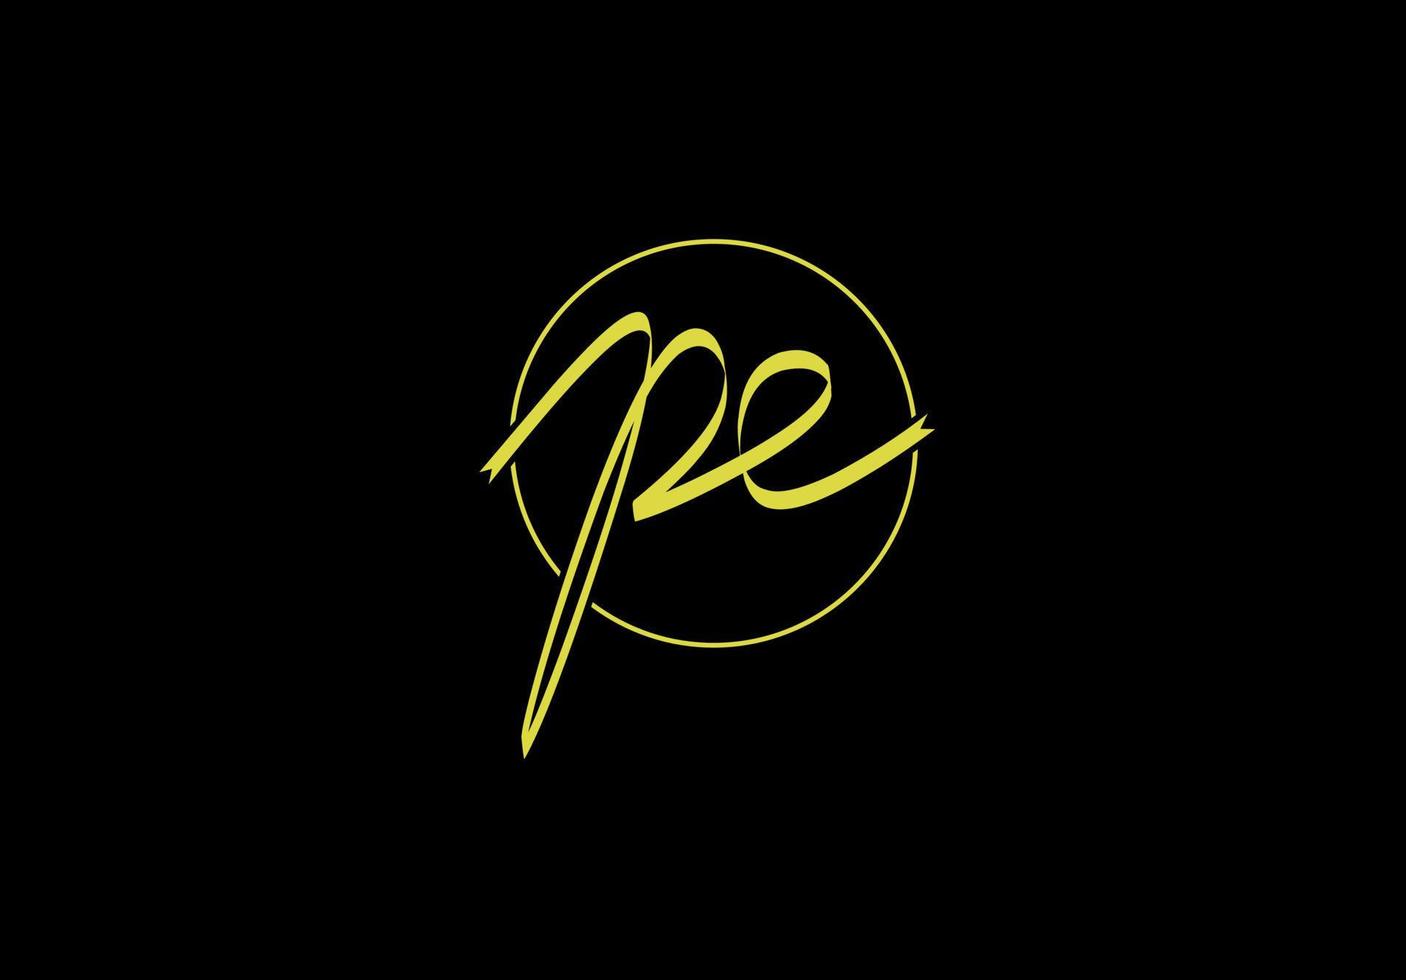 pe ep p e initial letter logo isolated on black background vector